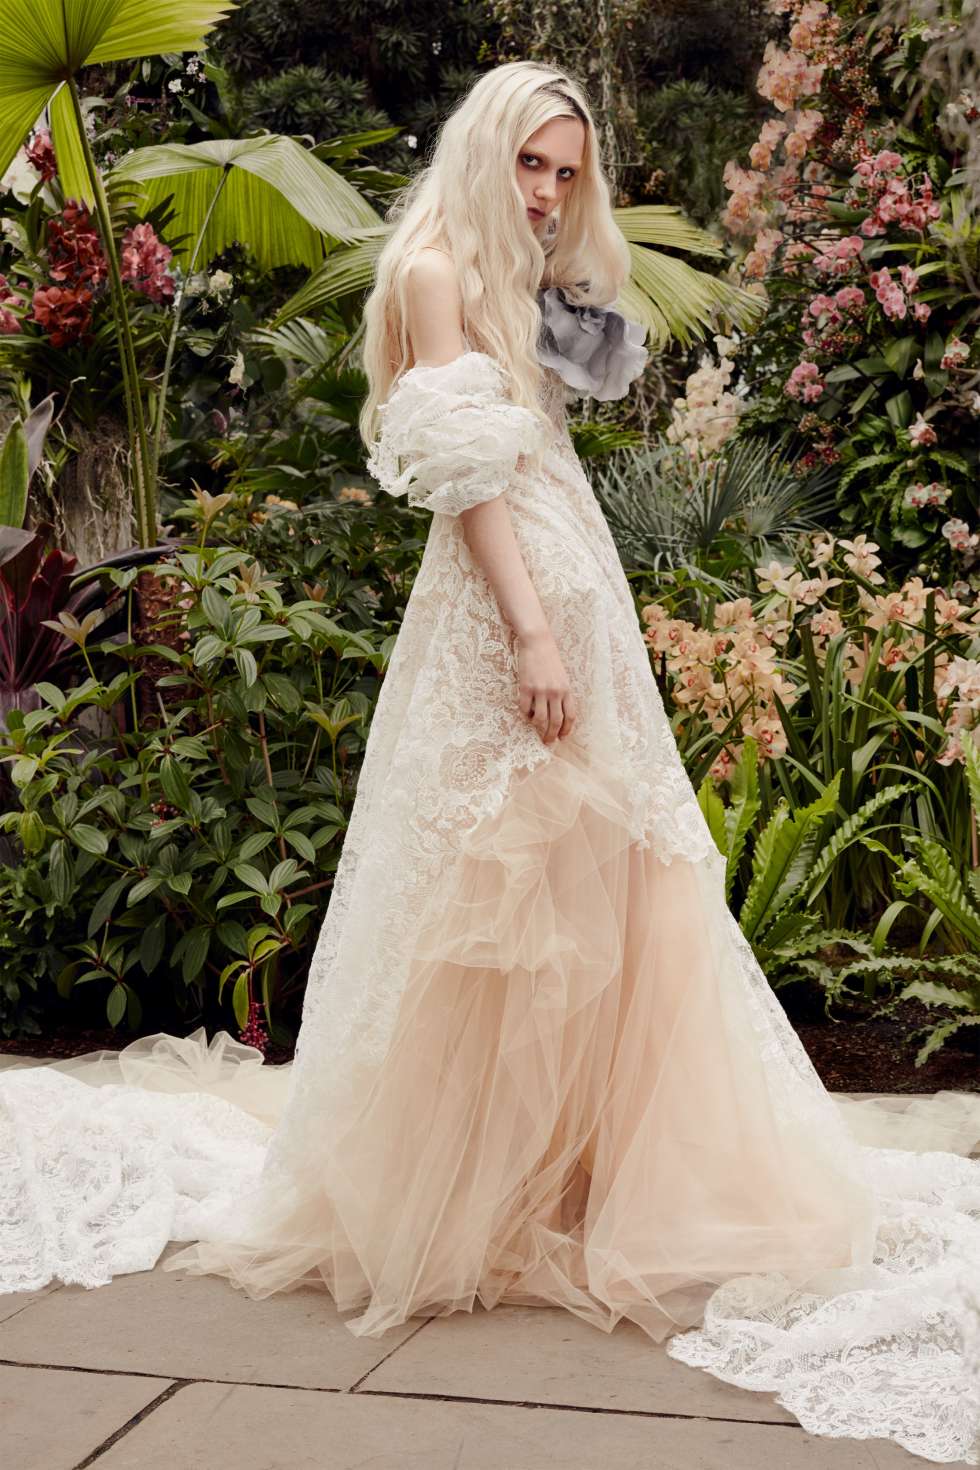 The 2020 Wedding Dress Collection by Vera Wang